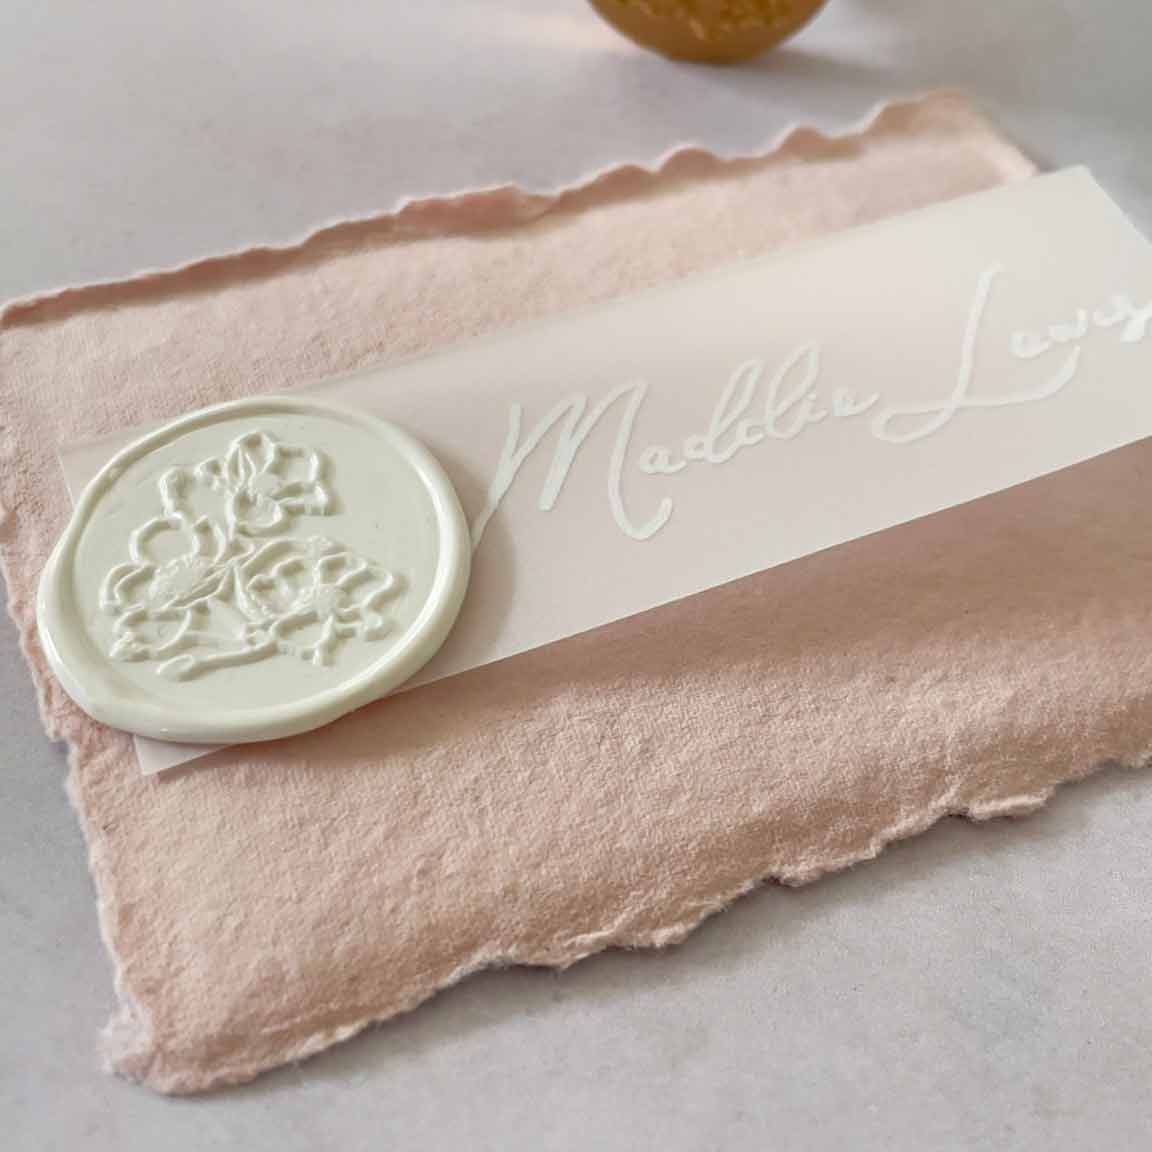 Wedding Place card using vellum and blush handmade card     wow vow